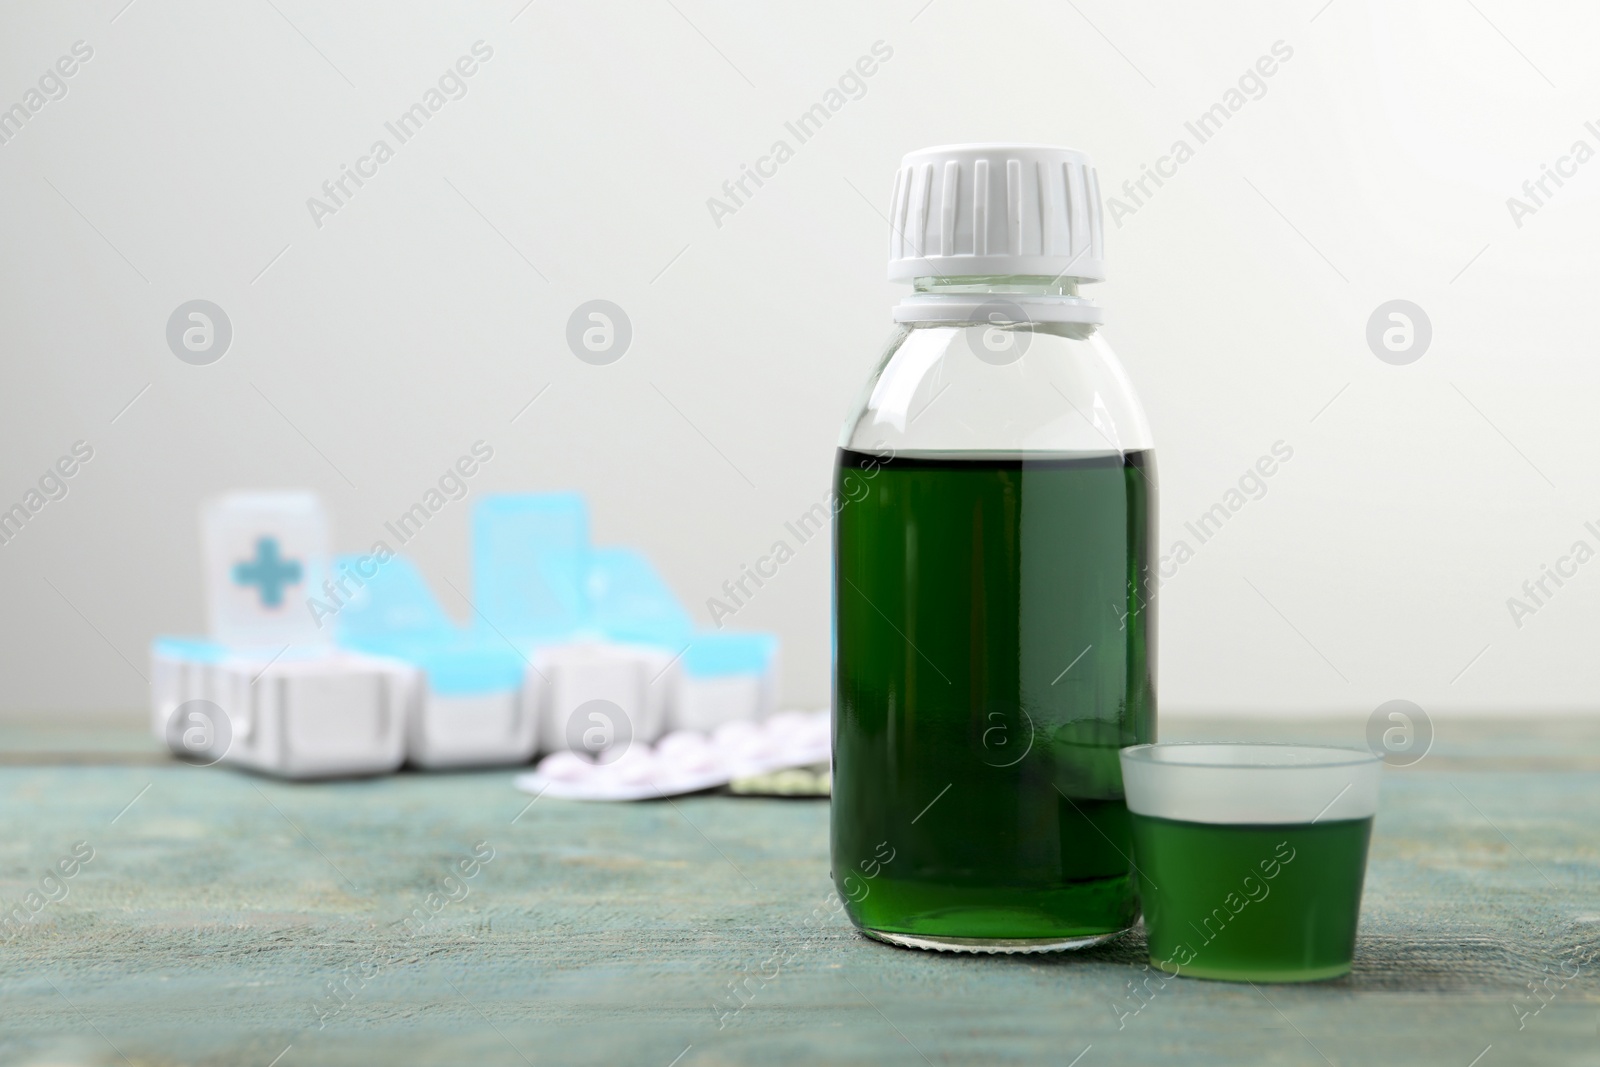 Photo of Bottle of syrup and measuring cup on wooden table against white background, space for text. Cold medicine